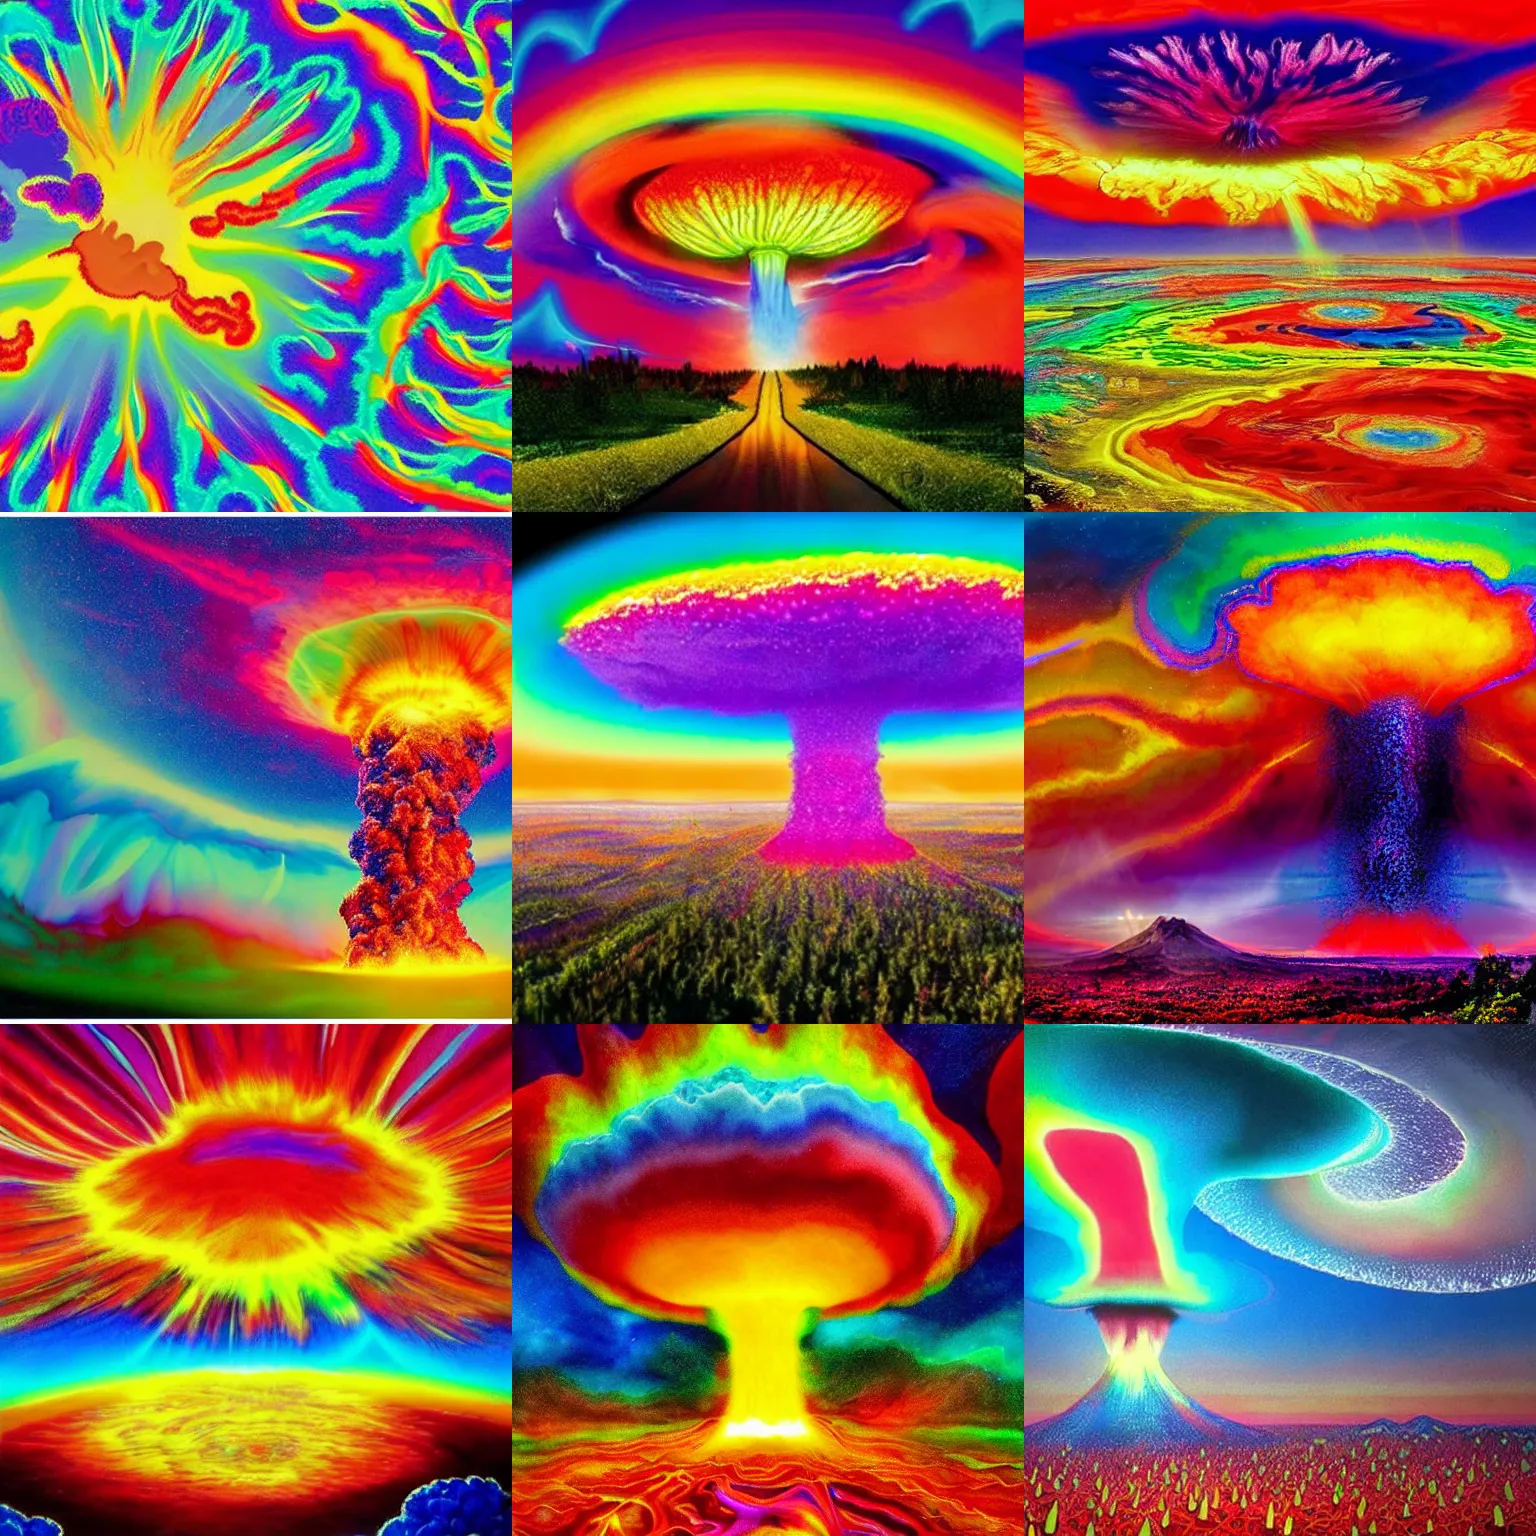 Prompt: A giant, colorful, psychedelic mushroom cloud is billowing in the sky, engulfing everything in its path. The bright colors are mesmerizing and the explosion is so large it's almost overwhelming.